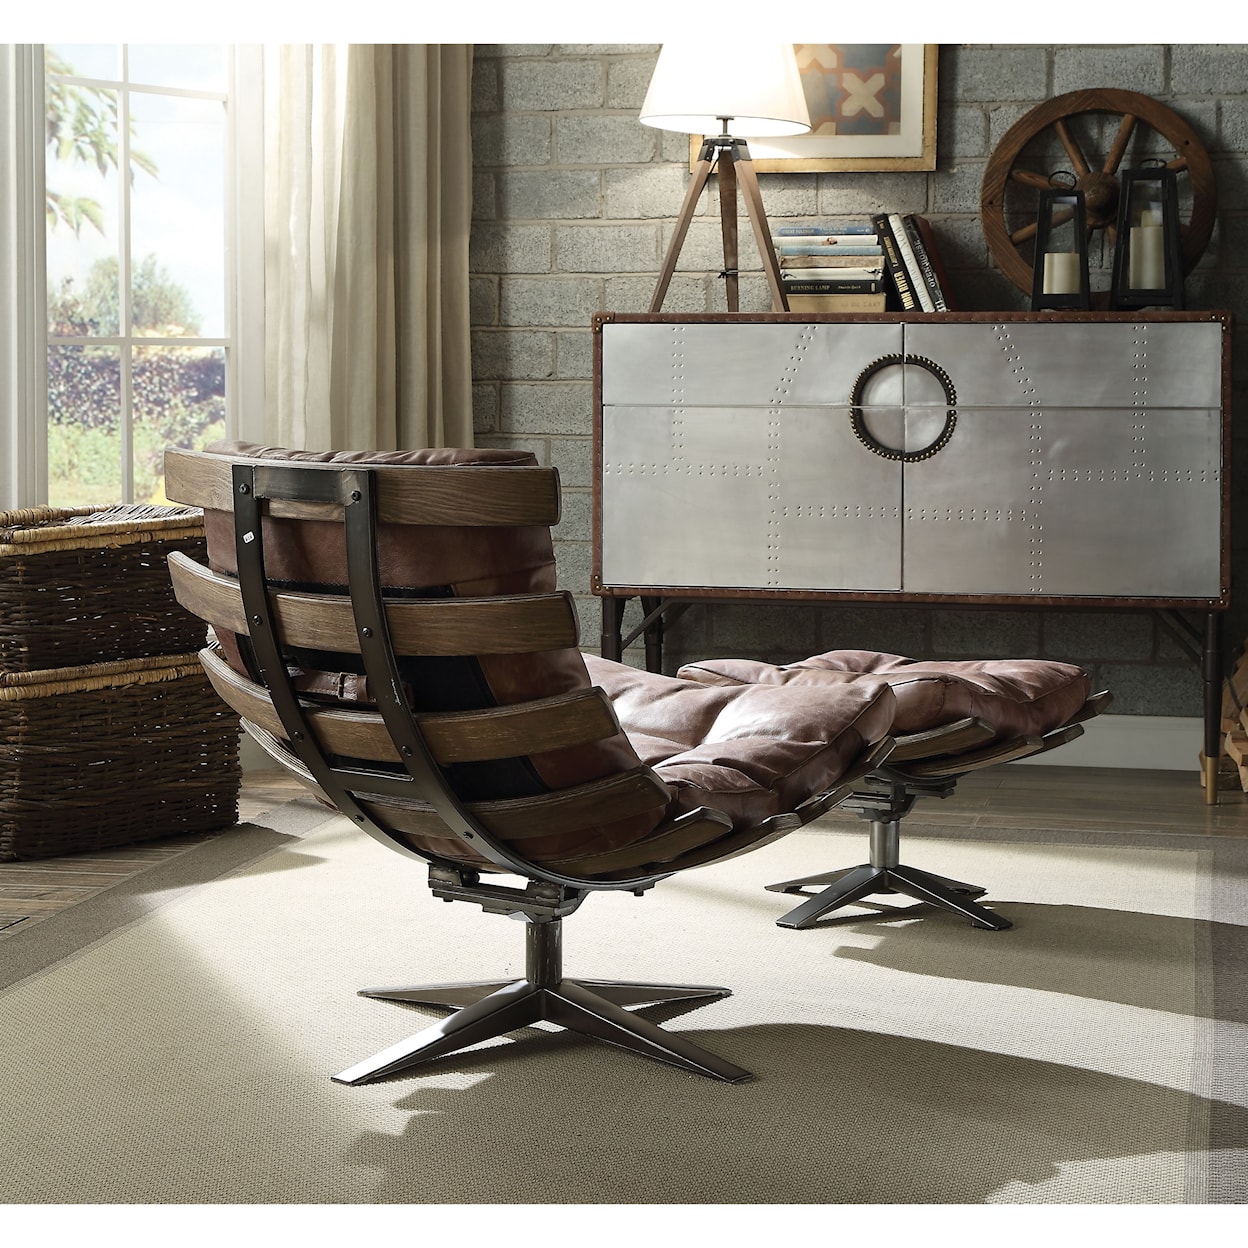 Acme Furniture Gandy Chair and Ottoman Set